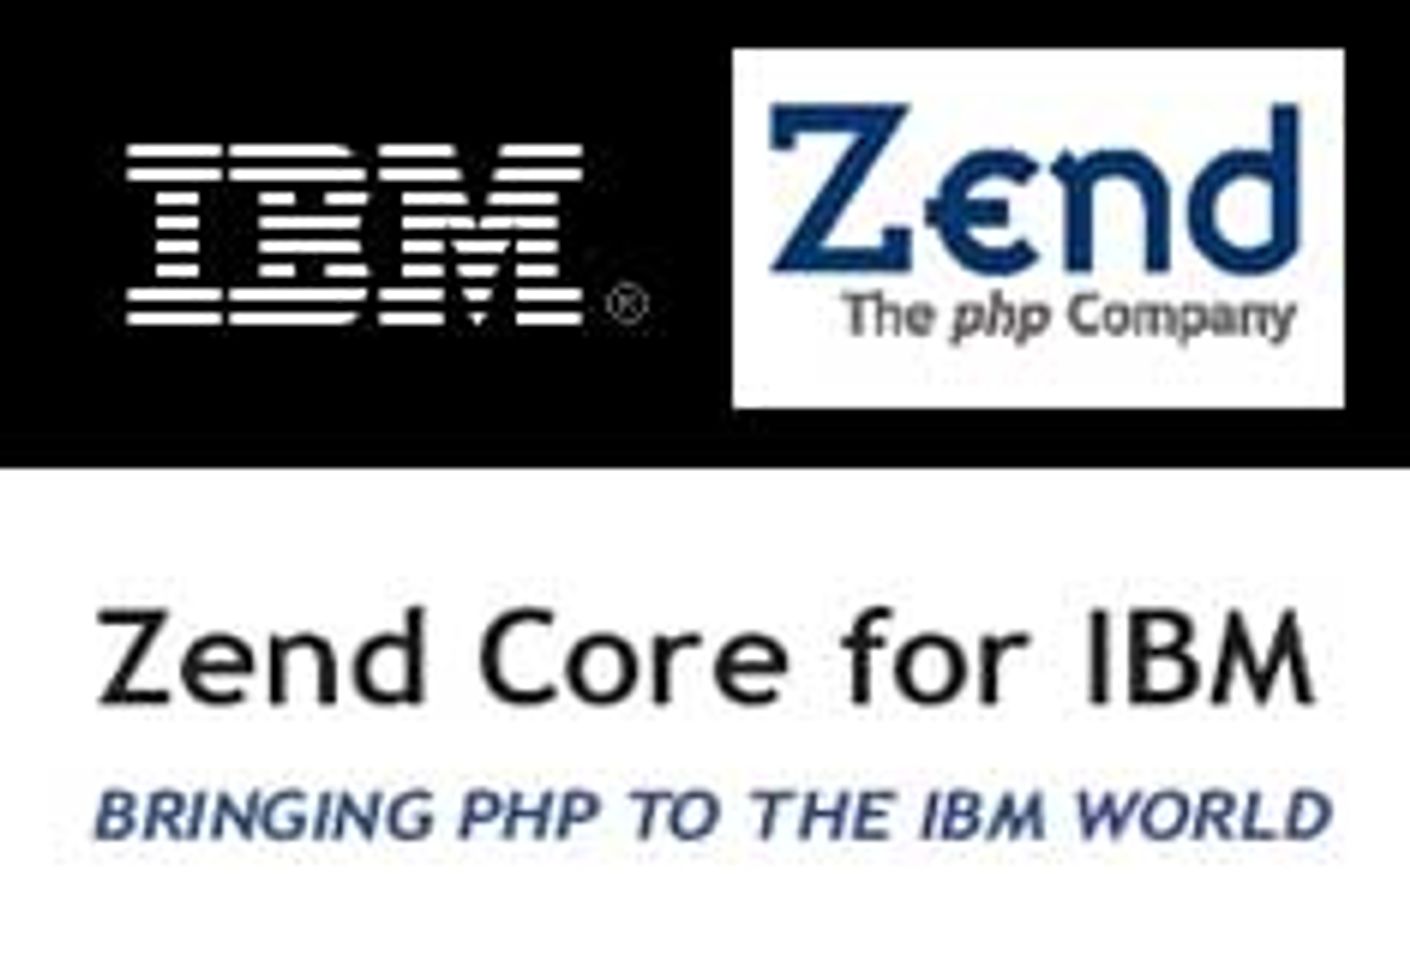 IBM Partners With Zend, Boosting PHP